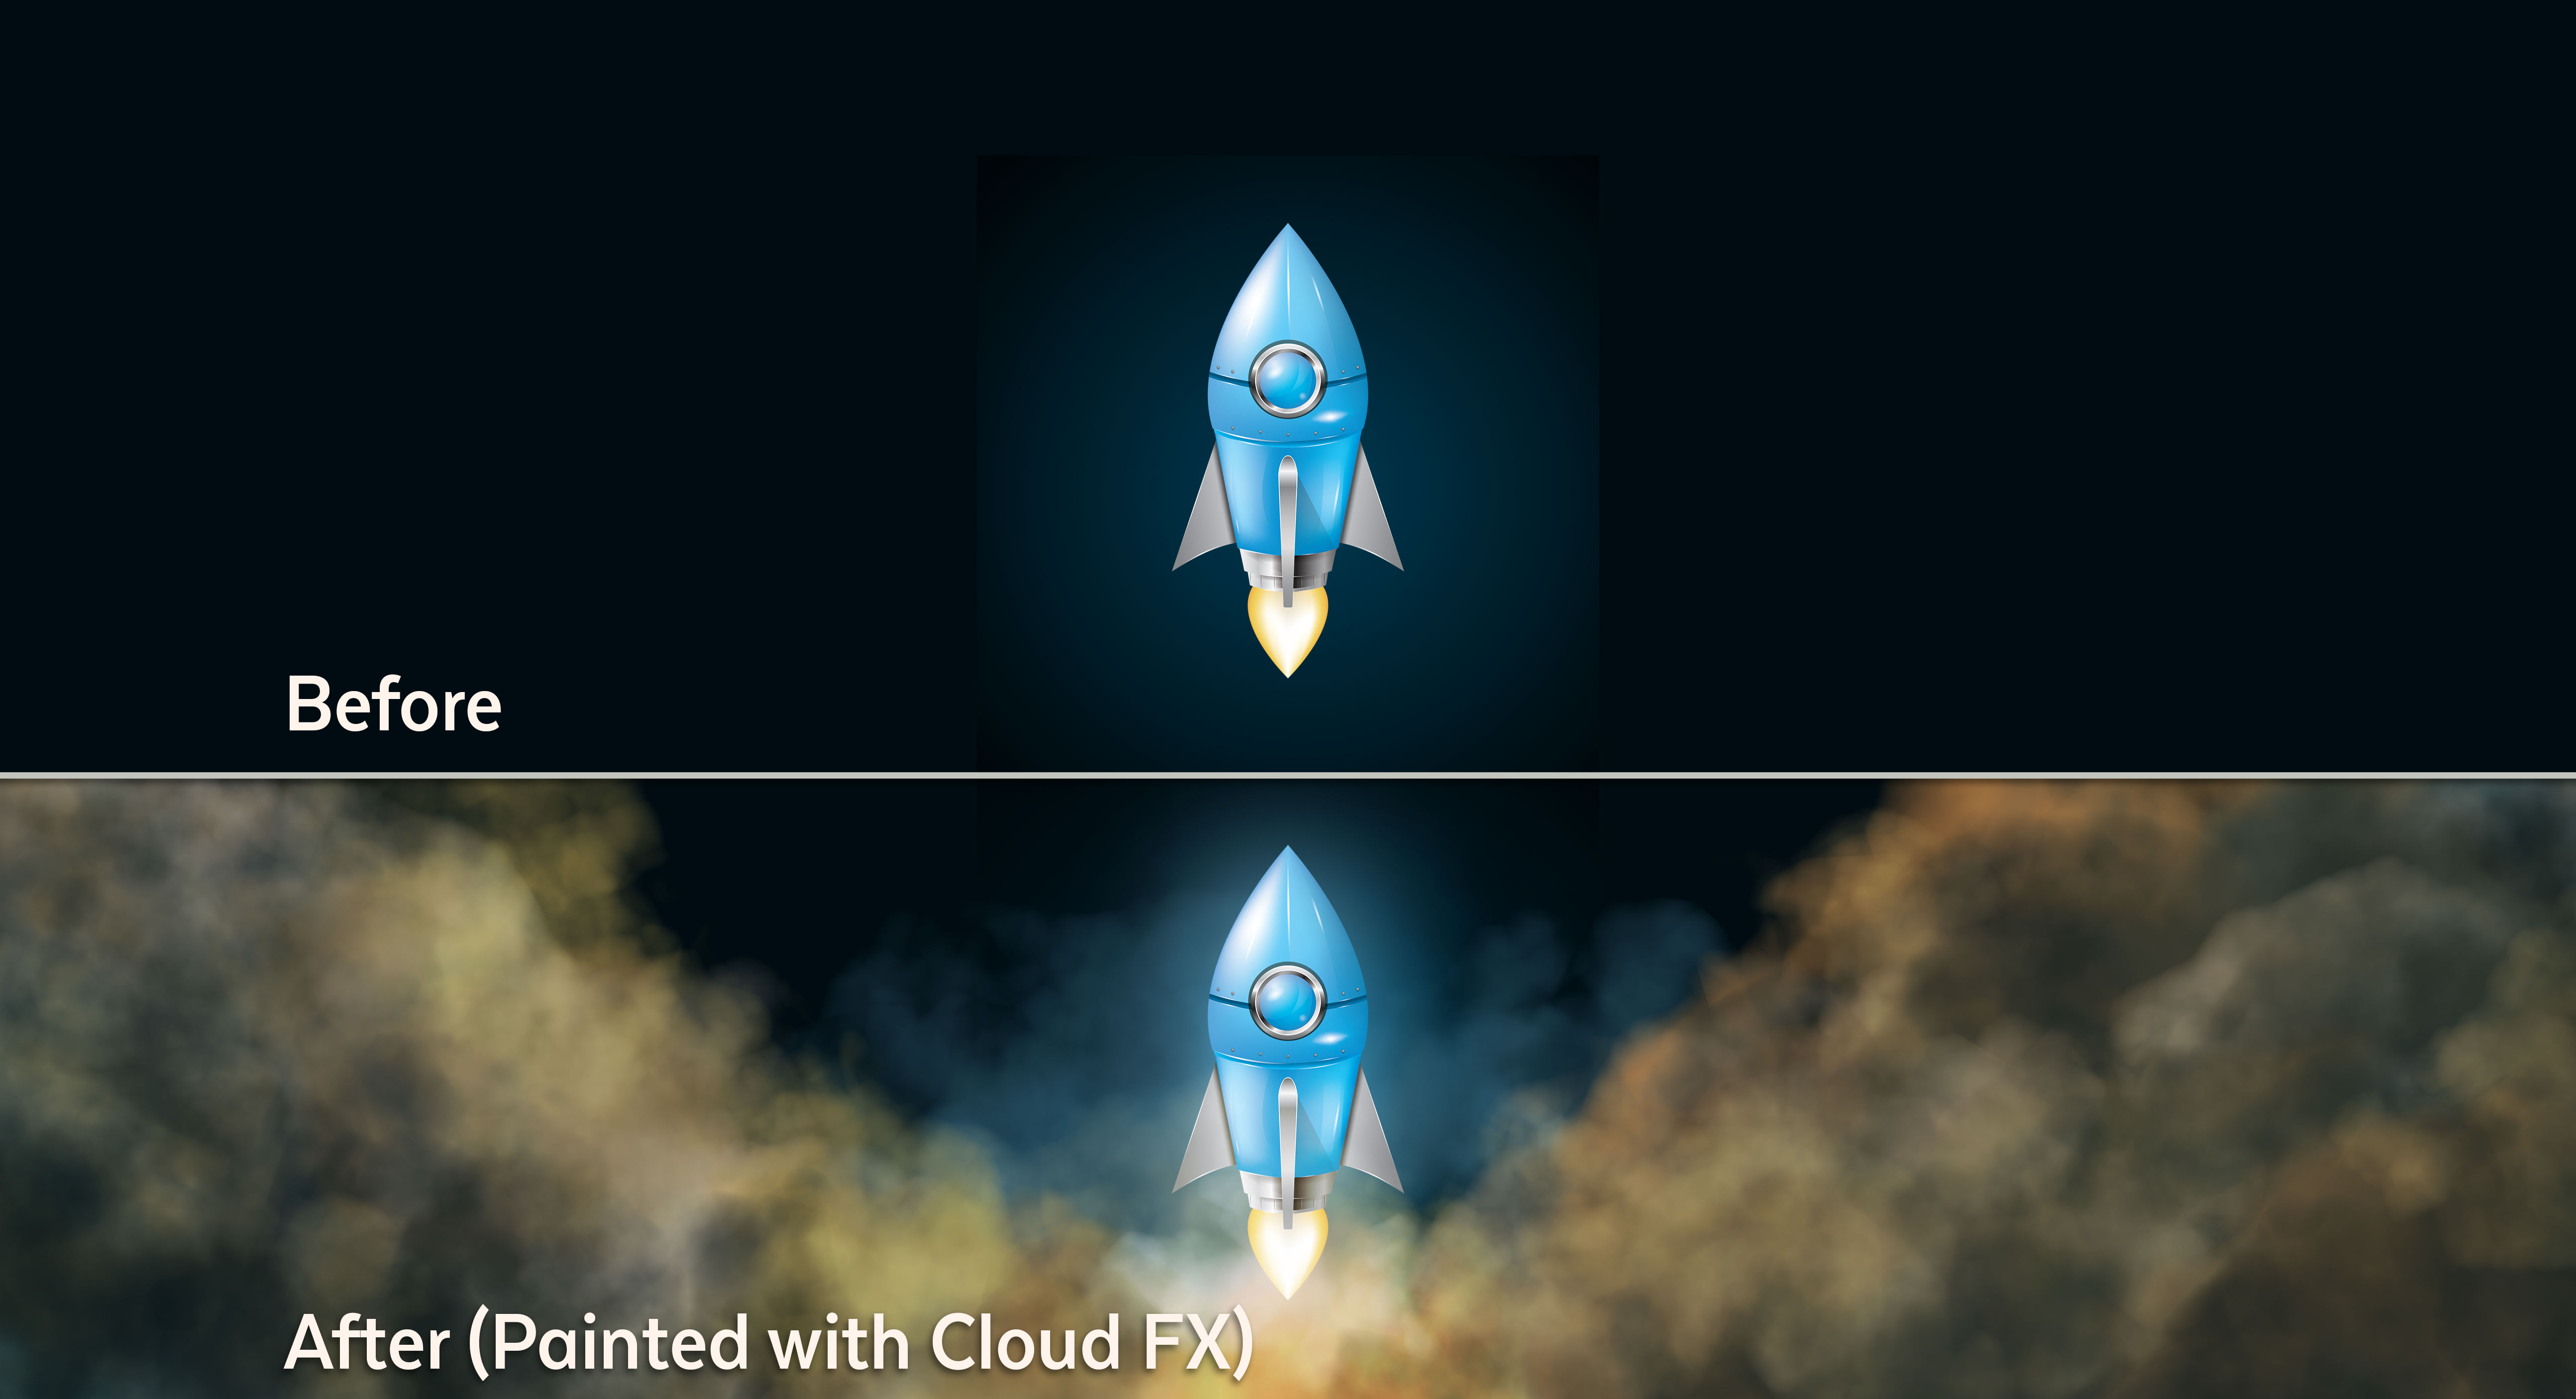 The cloud brushes were used here for painting smoke underneath the rocket